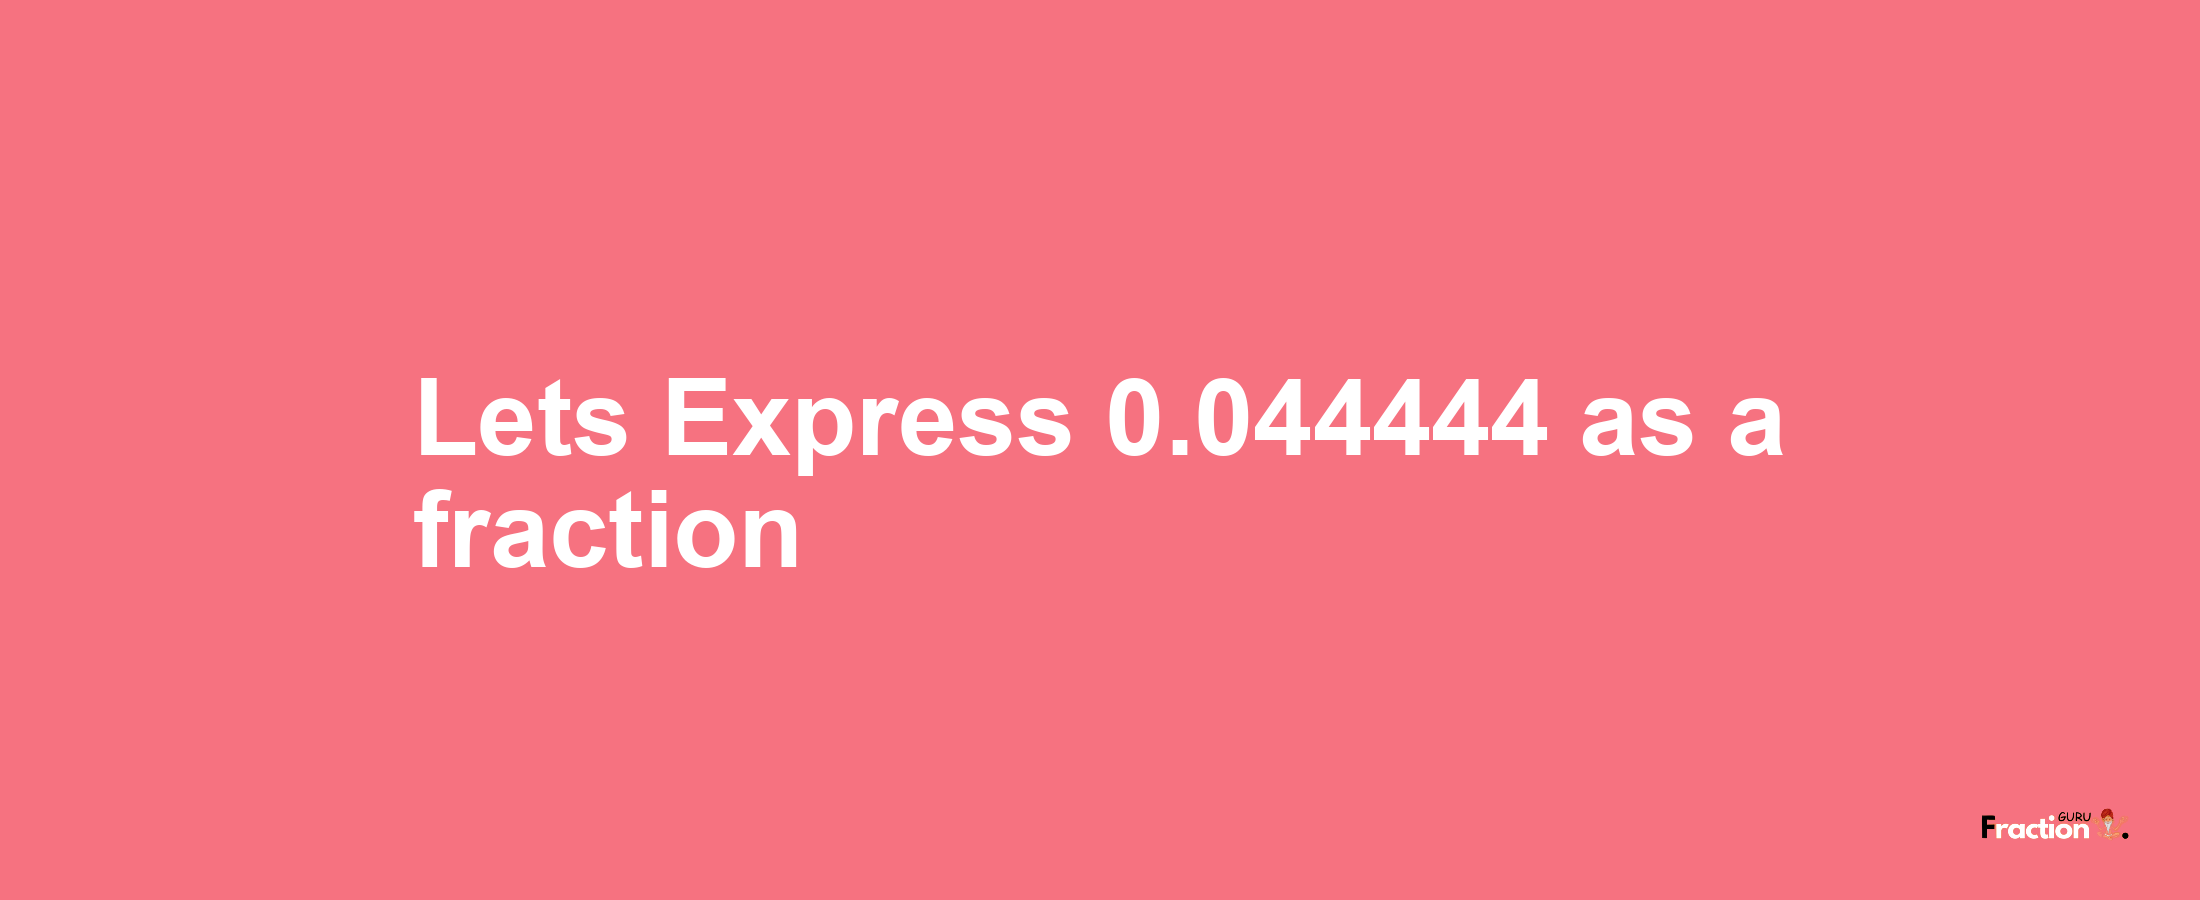 Lets Express 0.044444 as afraction